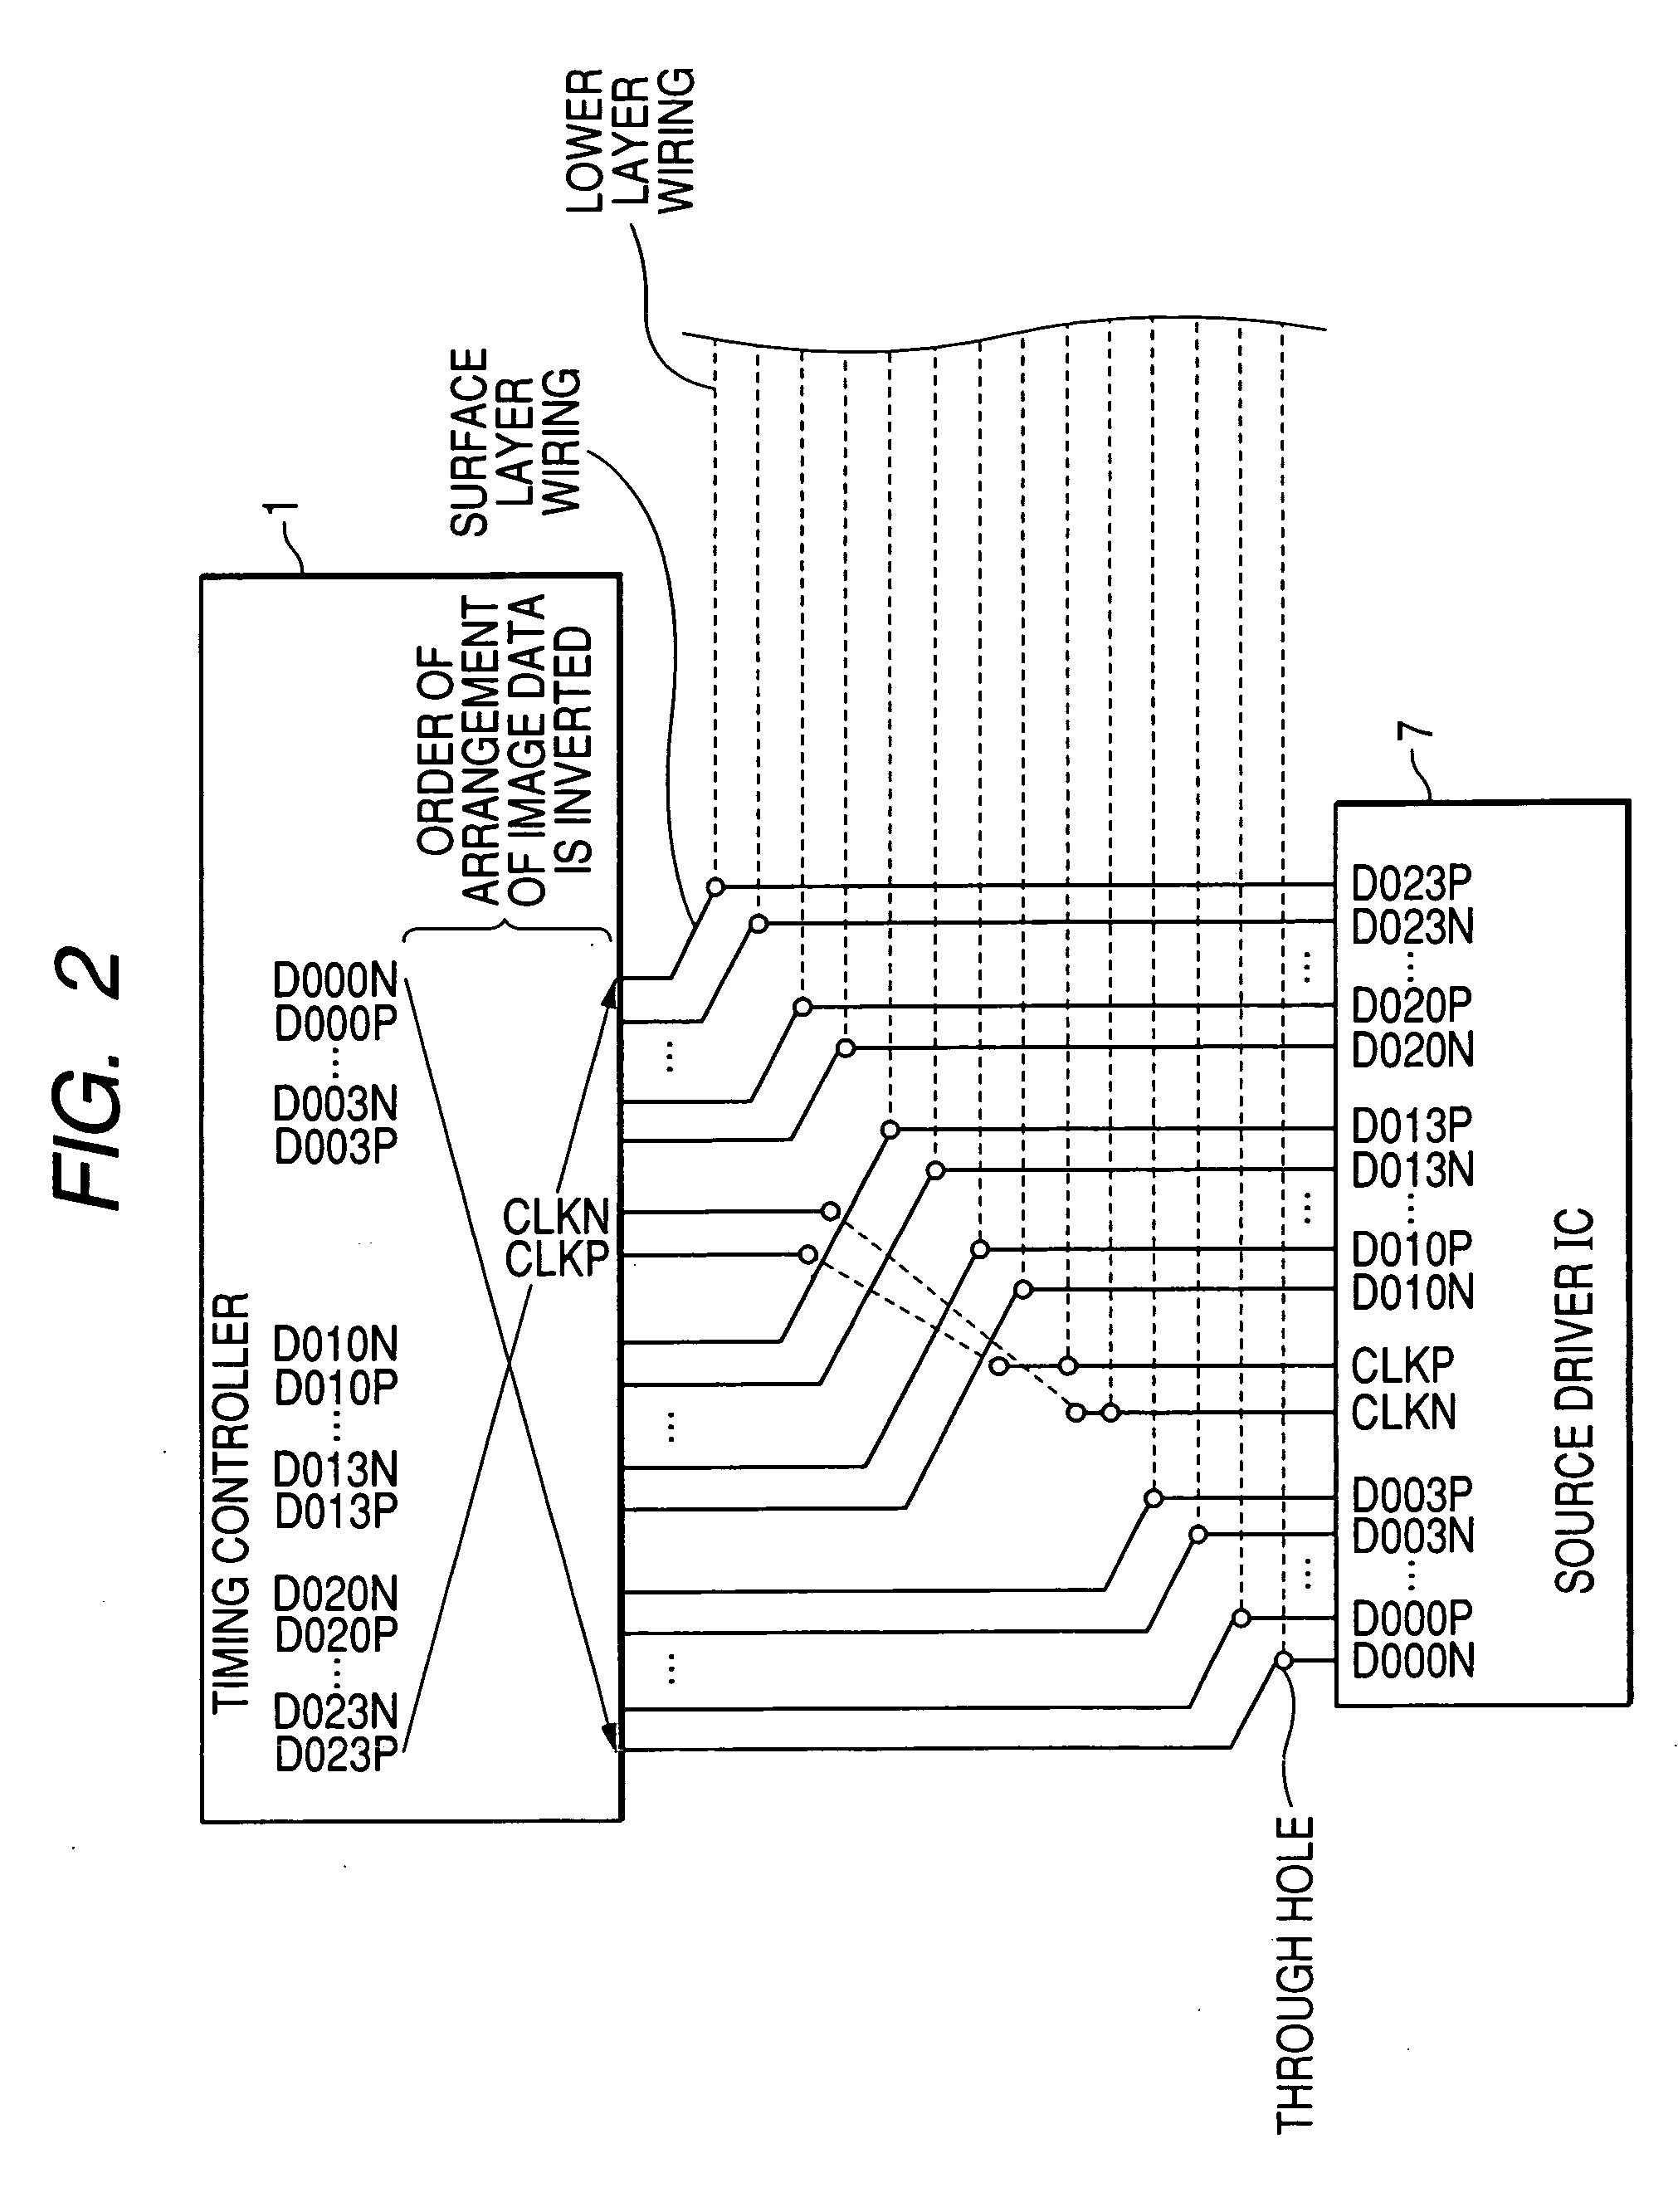 Image display apparatus, timing controller for driver IC, and source driver IC